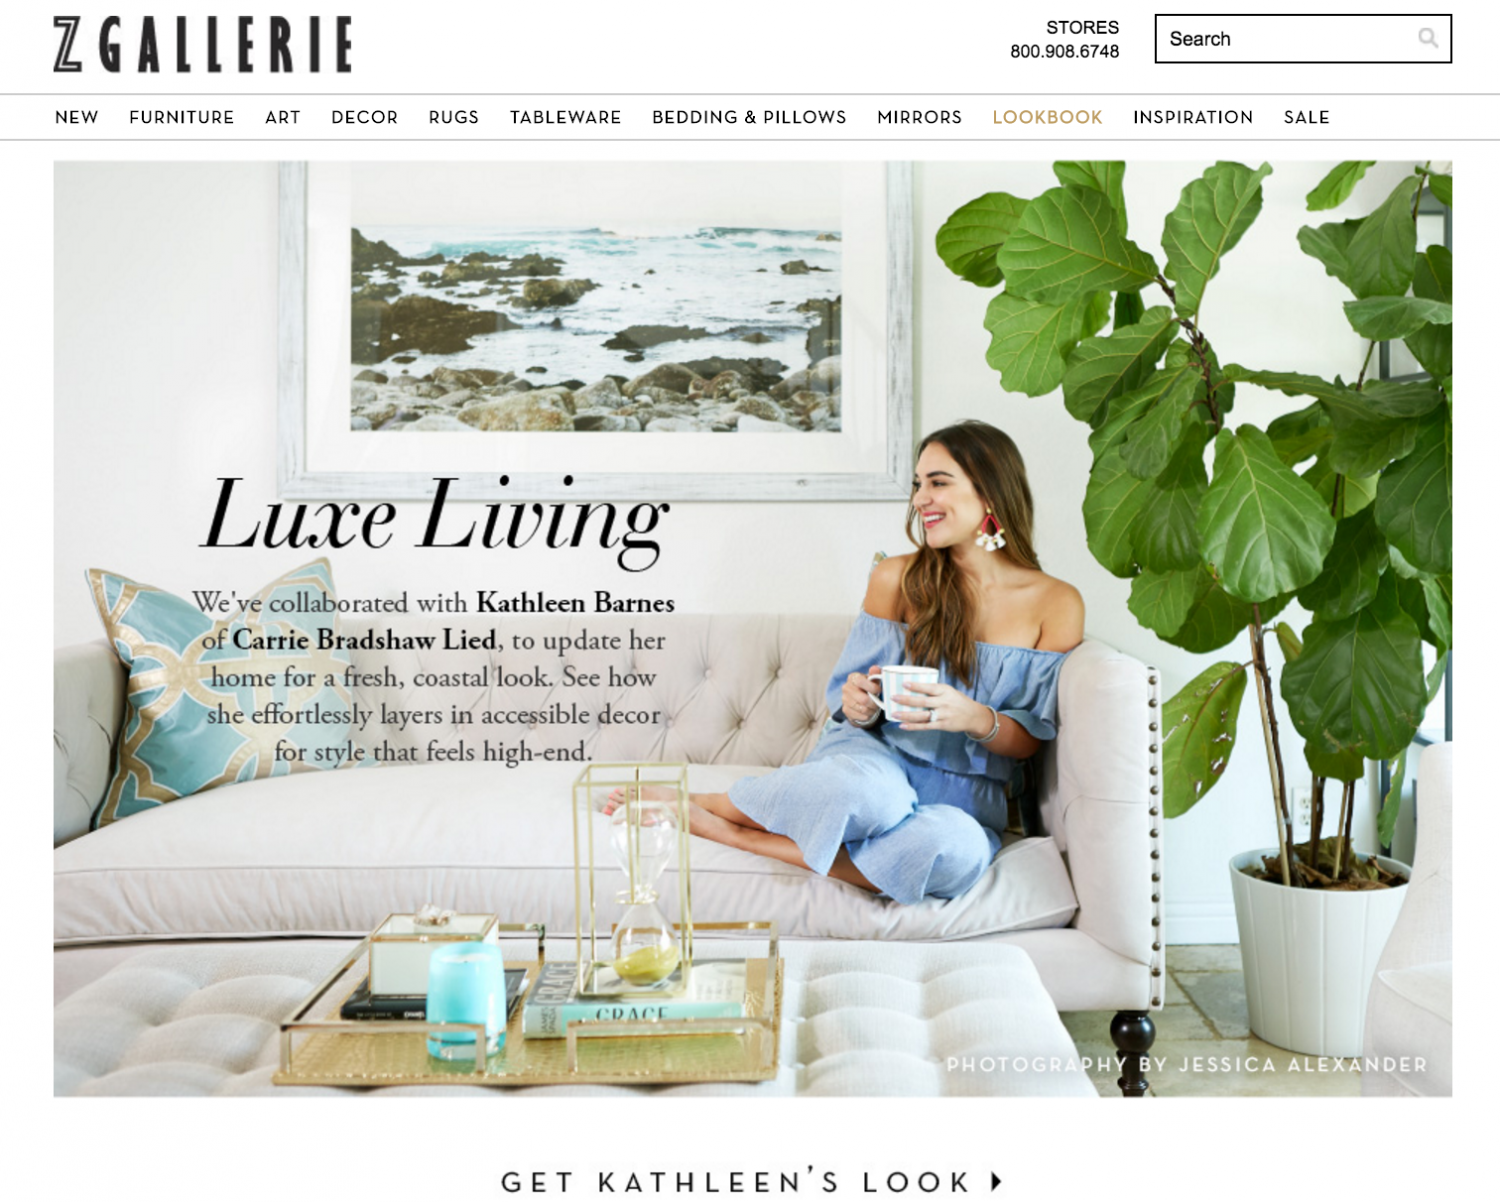 zgallerie luxe for less